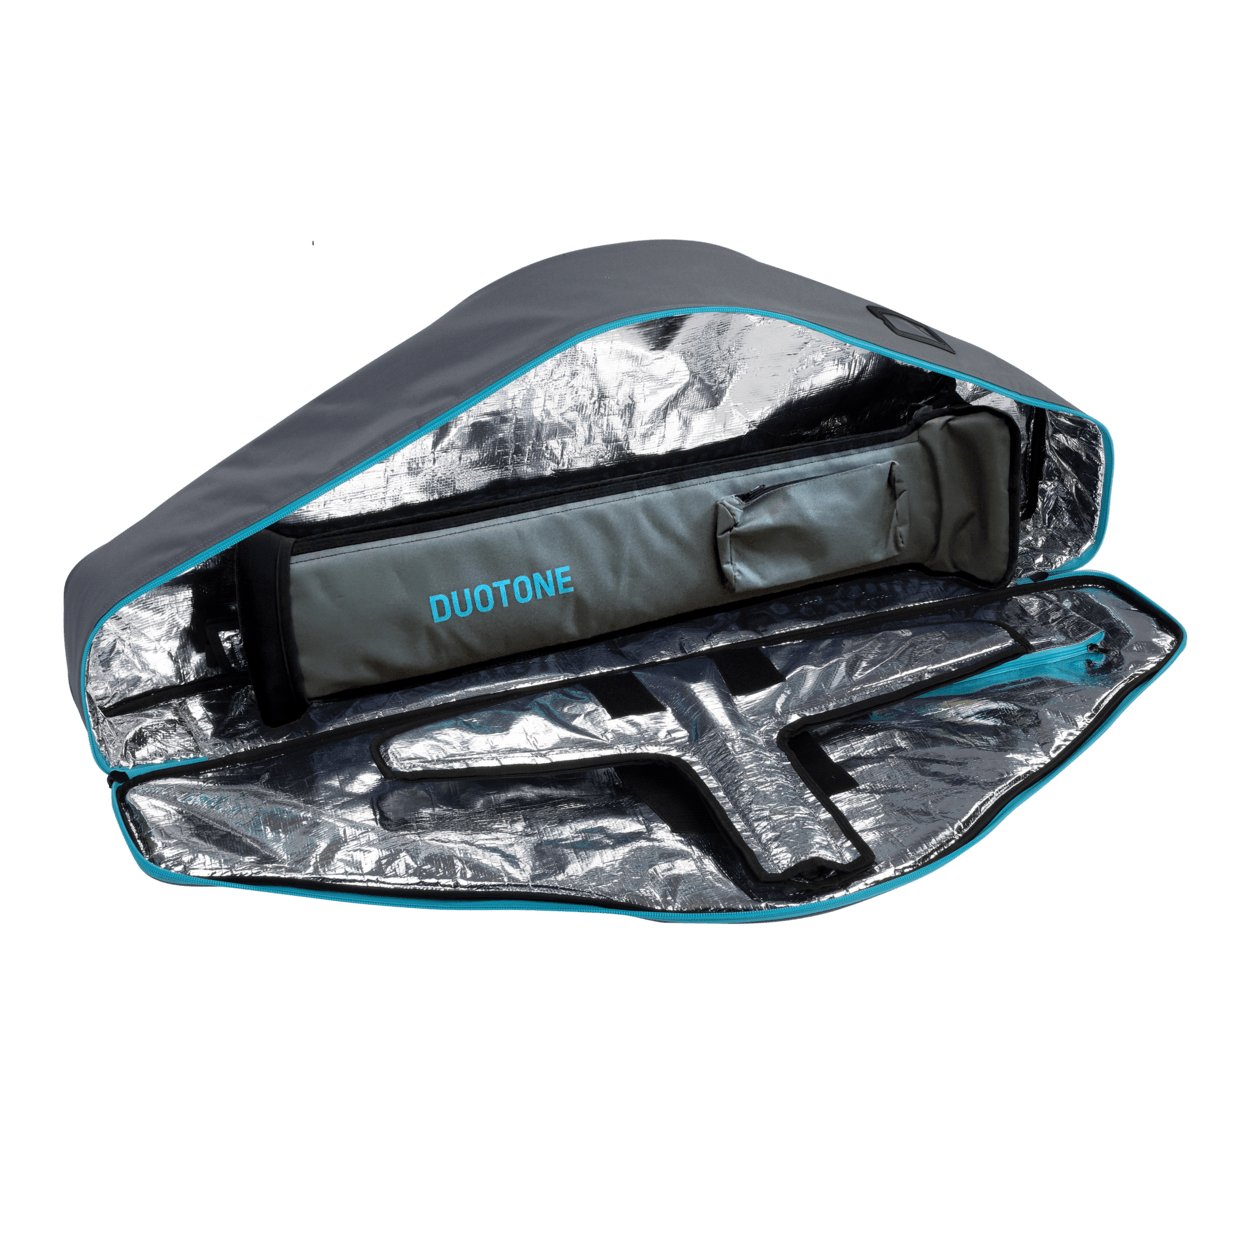 Duotone Foil Bag 2024 - Worthing Watersports - 9010583191881 - Accessories - Duotone X